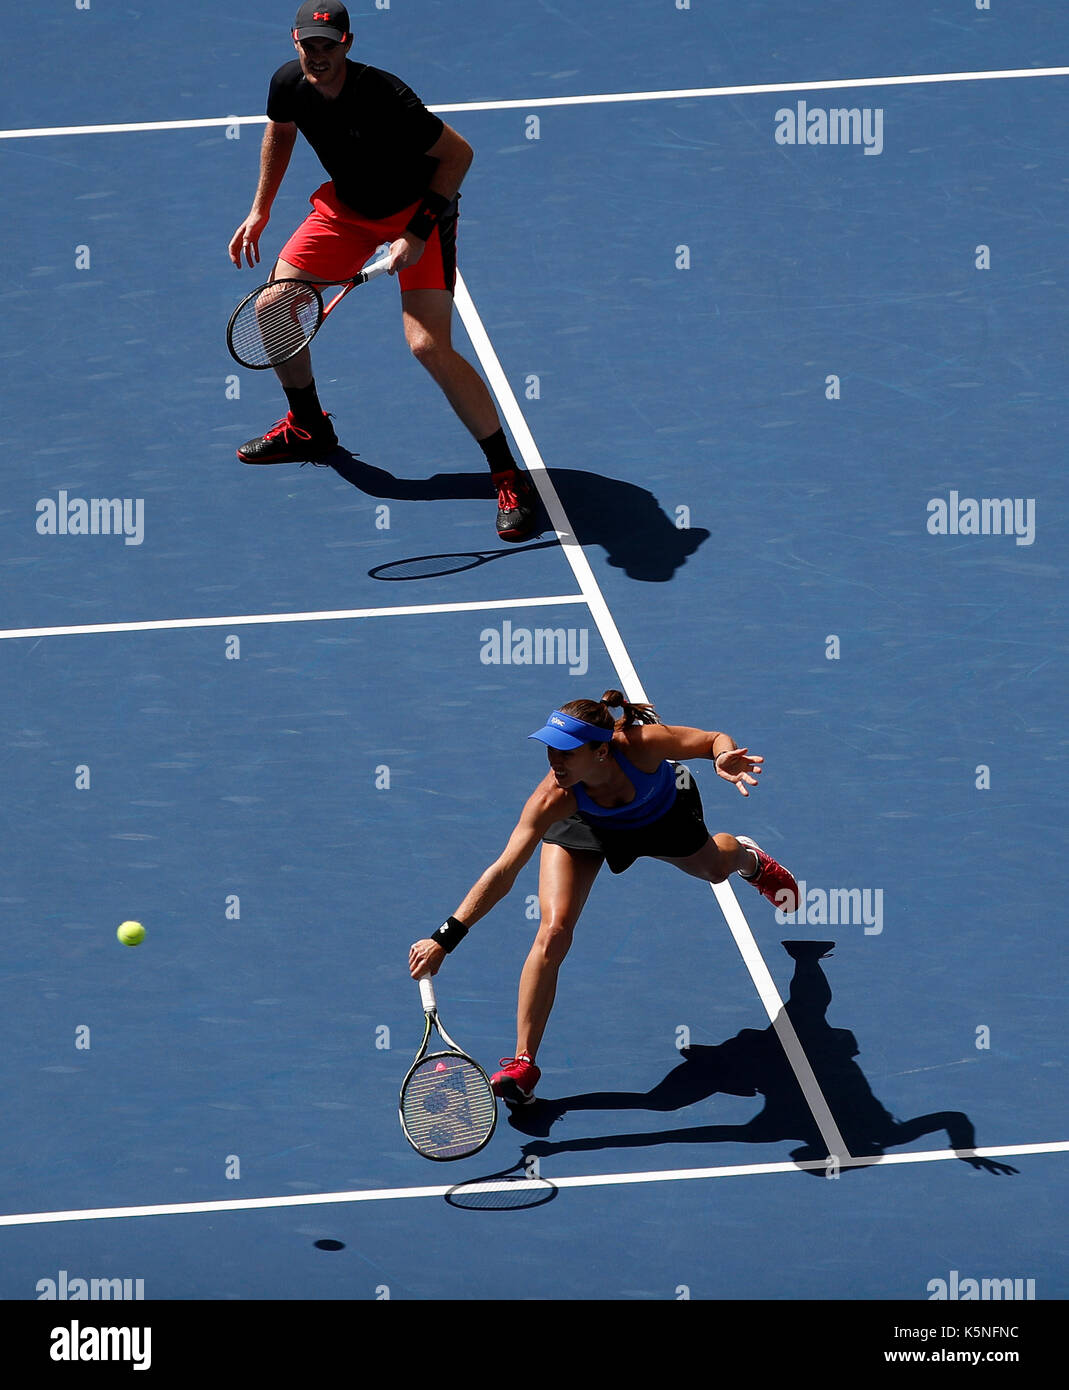 New York, USA. 9th Sep, 2017. Martina Hingis (Bottom) of Switzerland and Jamie Murray of Great Britain compete against Hao-Ching Chan of Chinese Taipei and Michael Venus of New Zealand during the mixed doubles final match at the 2017 US Open in New York, the United States, Sept. 9, 2017. Martina Hingis and Jamie Murray won 2-1 to claim the title. Credit: Qin Lang/Xinhua/Alamy Live News Stock Photo